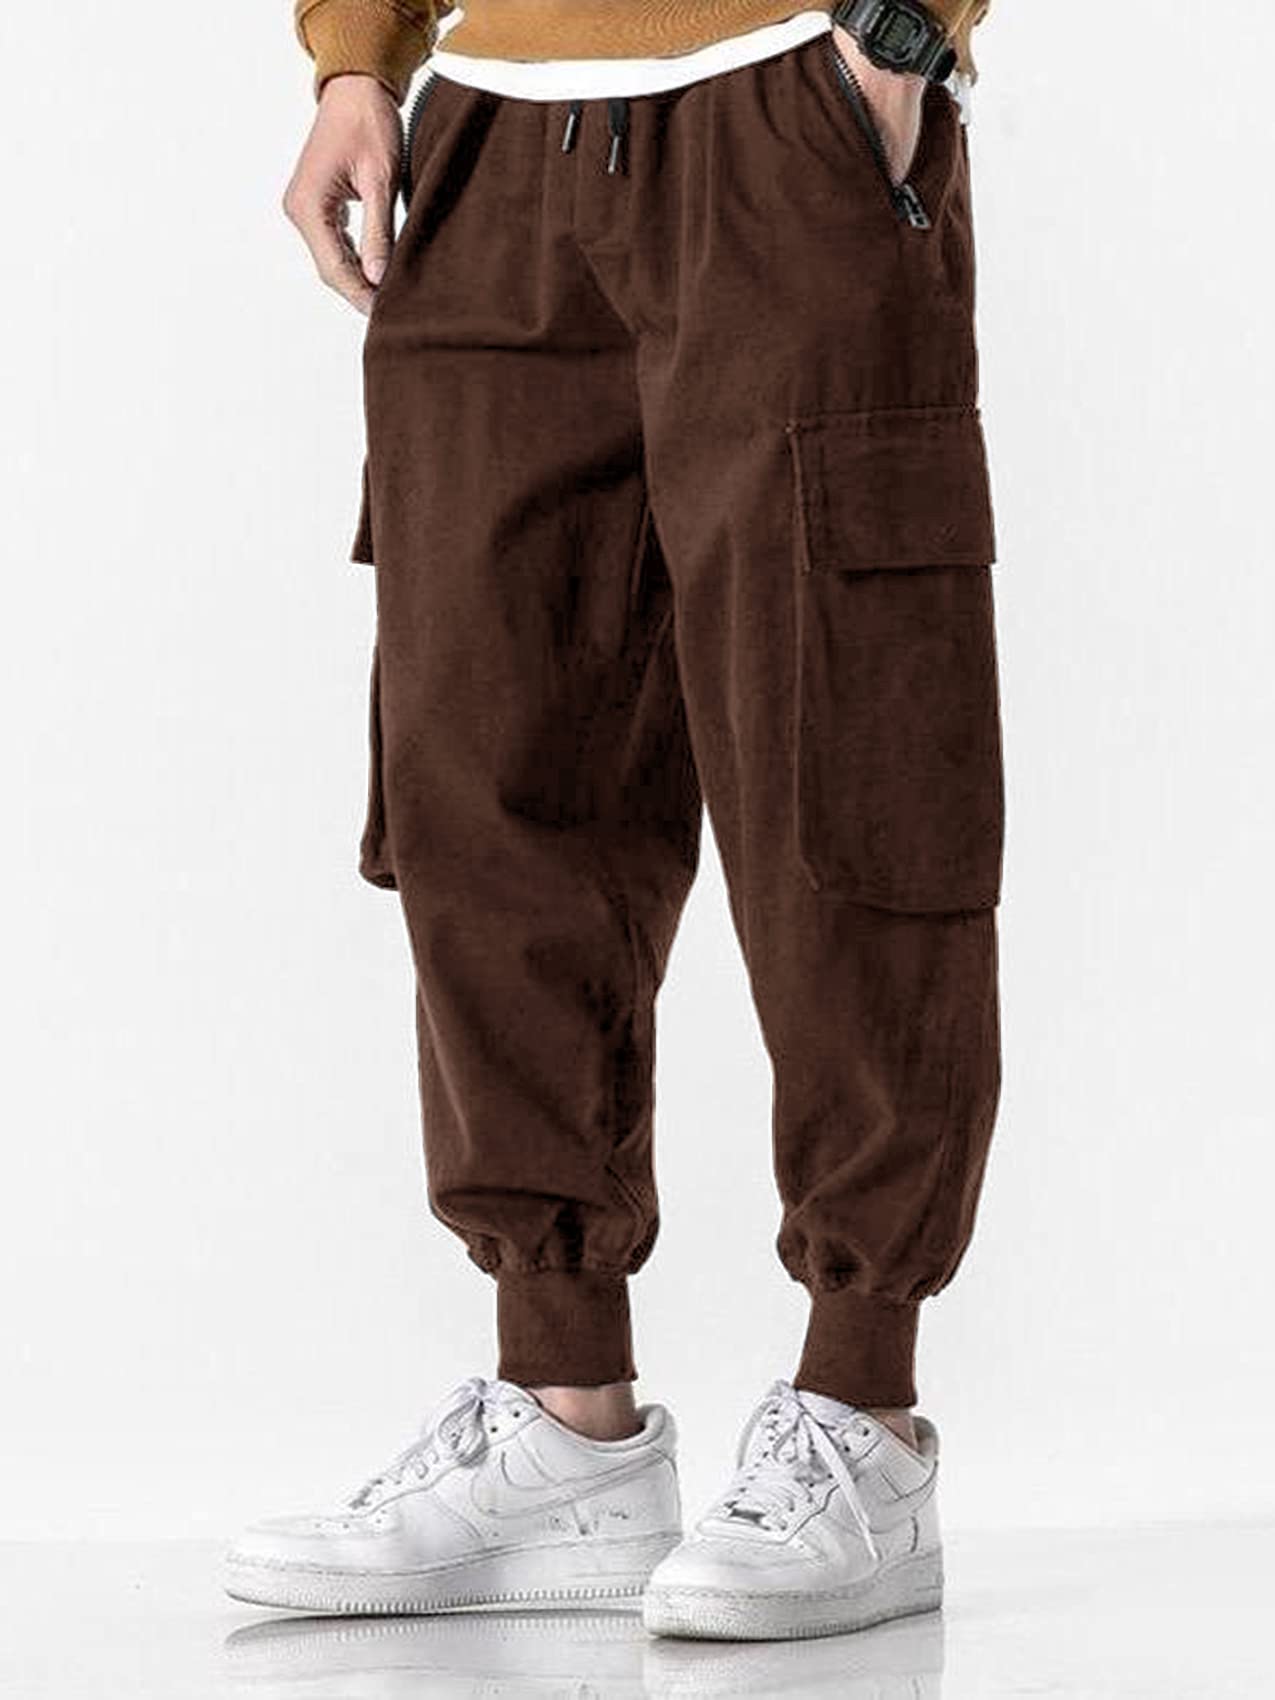 Men's Joggers Pants Casual Baggy Cotton Drawstring Tapered Sweatpants Cargo Hippie Loose Fit Trousers with Multi-Pocket